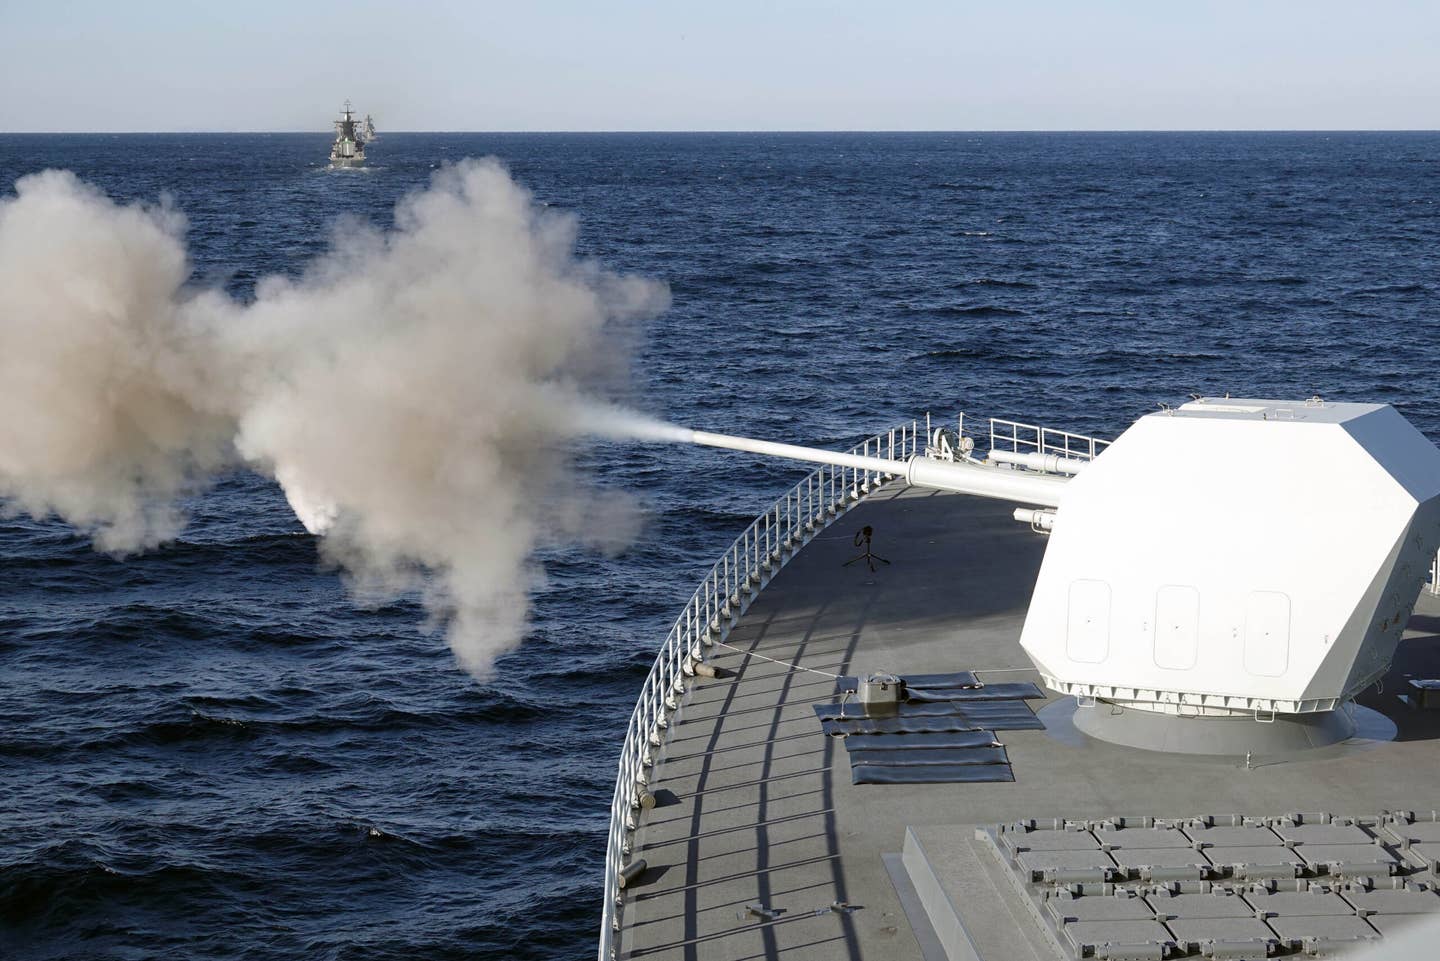 The main gun of Chinese guided-missile destroyer Nanchang attacks target during the China-Russia 'Joint Sea-2021' military drill near the Peter the Great Gulf on October 15, 2021 in Russia. (Photo by Sun Zifa/China News Service via Getty Images)